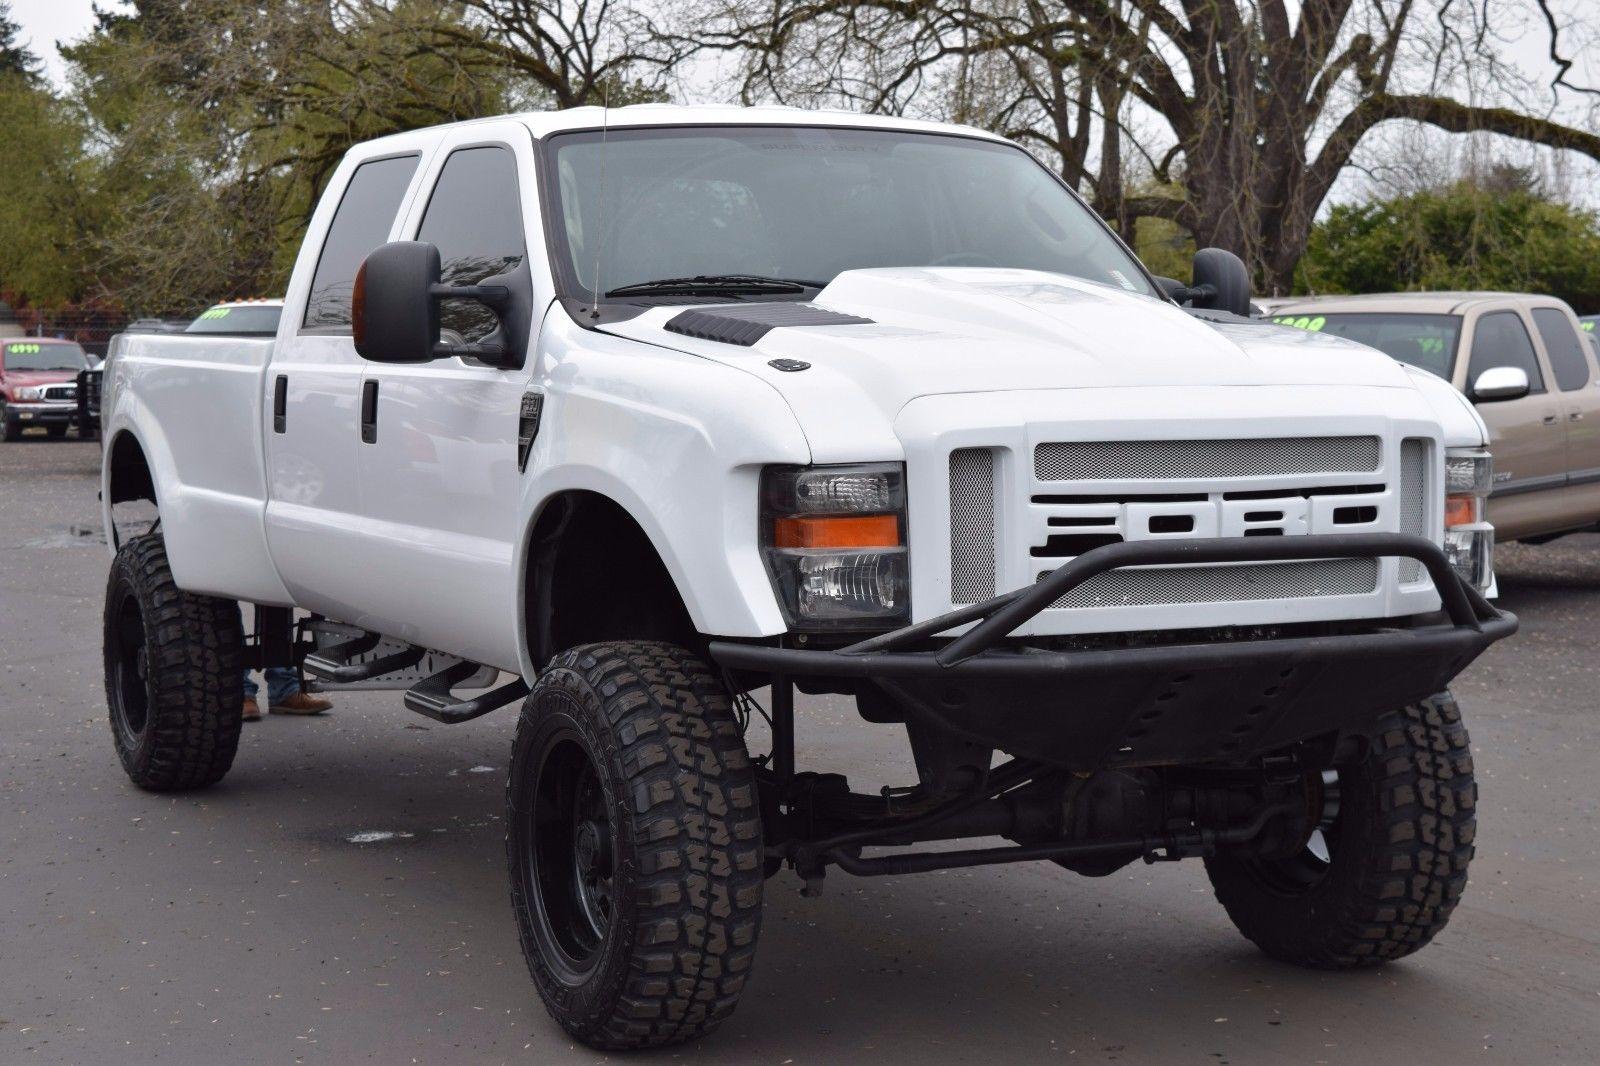 Clean badass 2004 Ford F 350 monster truck for sale